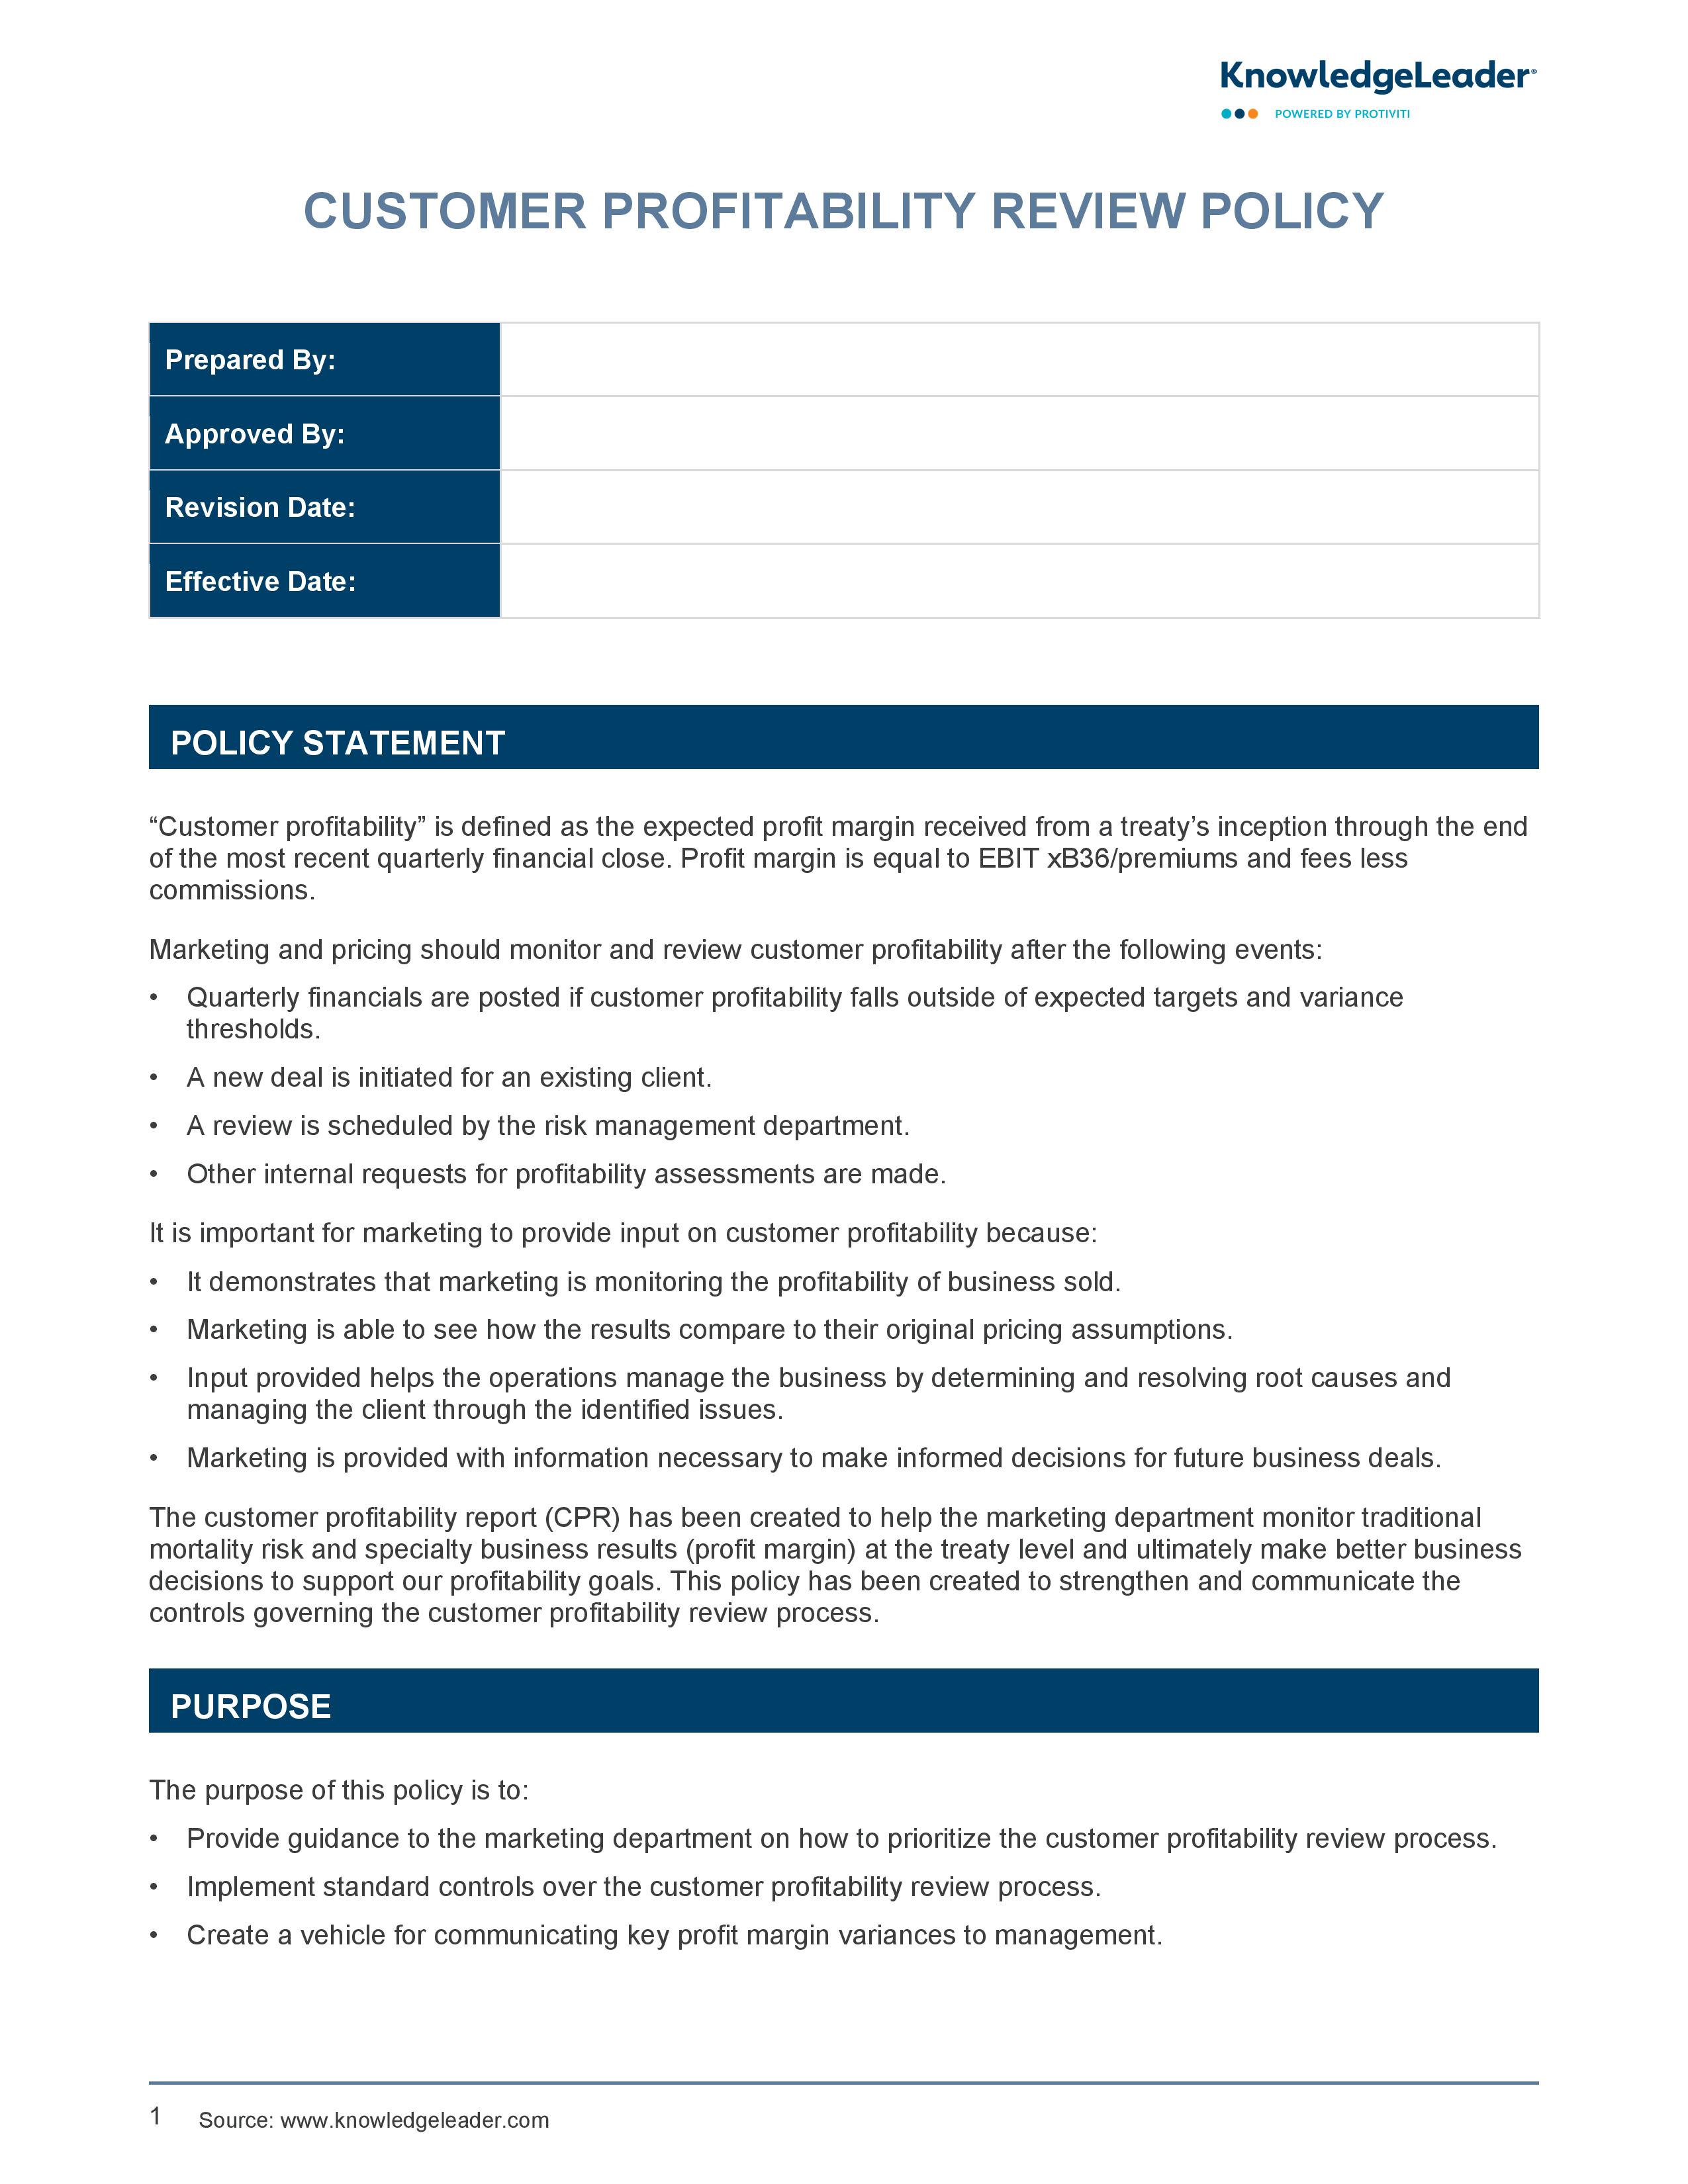 screenshot of the first page of Customer Profitability Review Policy